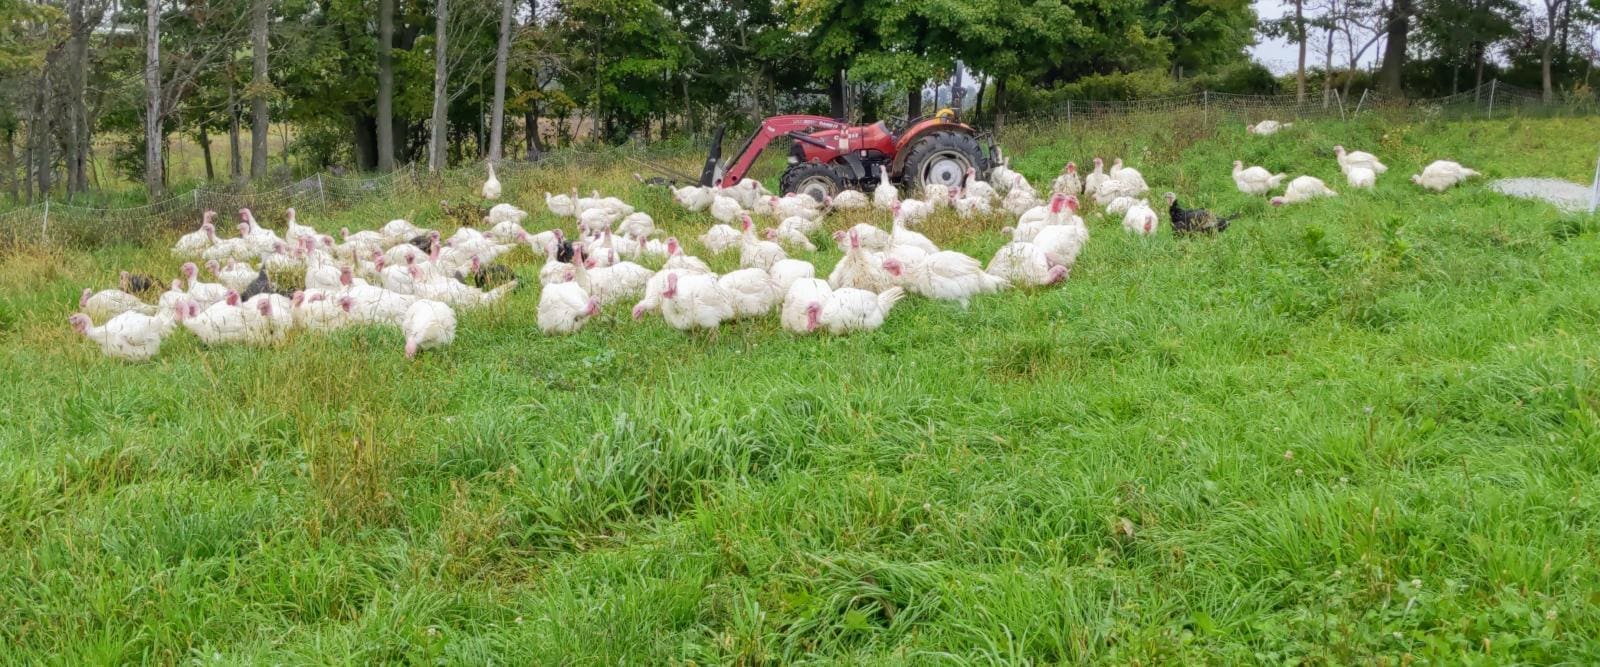 Pasture raised, certified organic turkeys grazing at Wrong Direction Farm in New York.